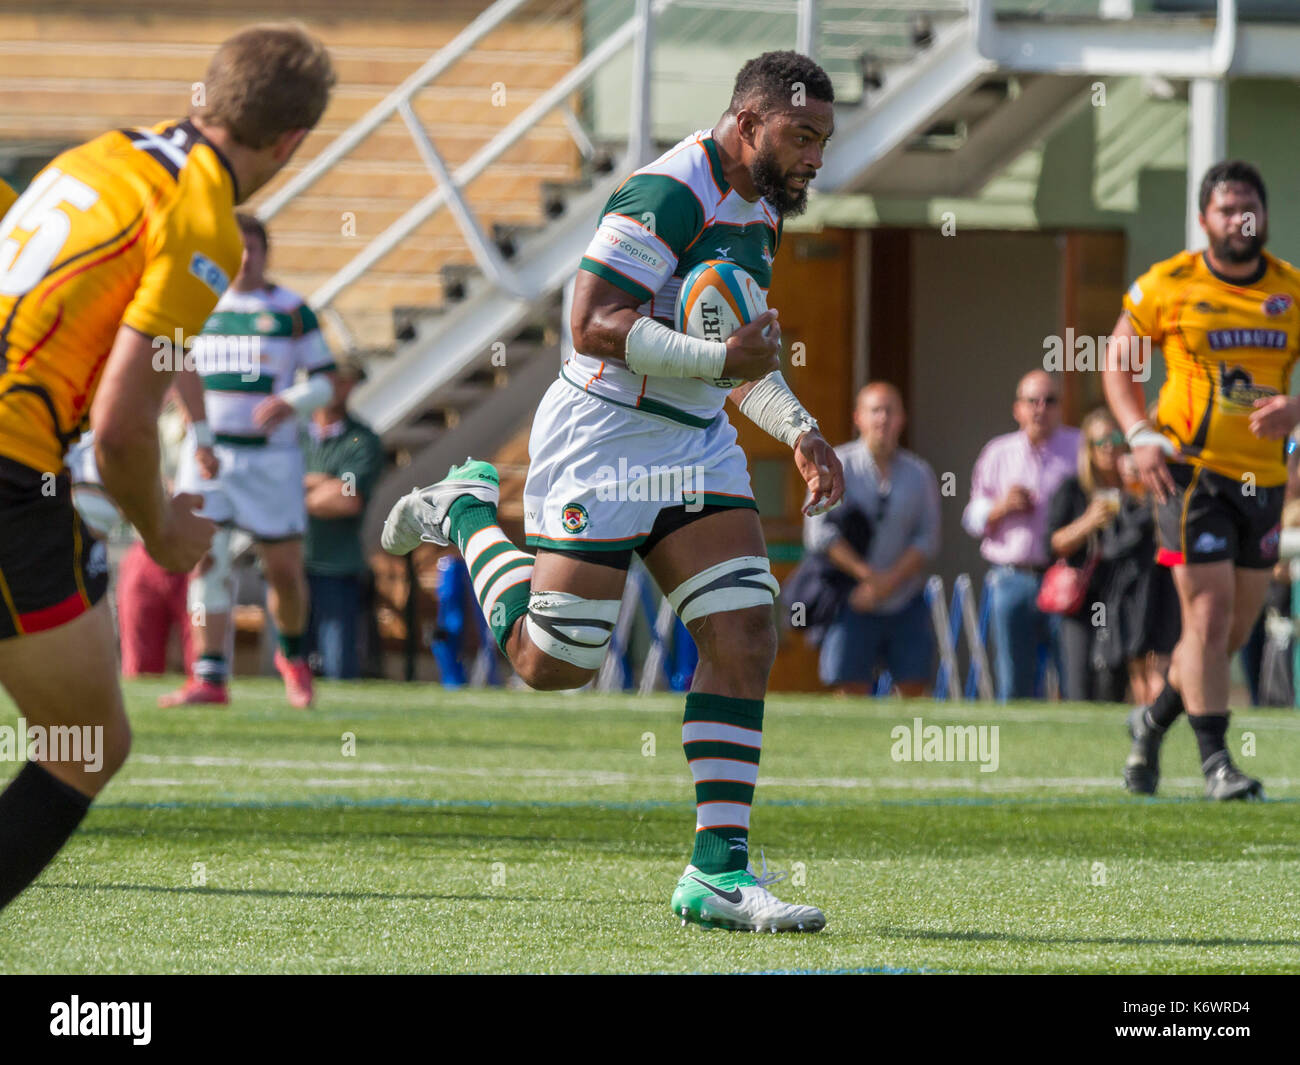 Andrew Durulato charges for the line and goes on to score a try, Ealing Trailfinders v Cornish Pirates in a Greene King IPA Championship match at Cast Stock Photo